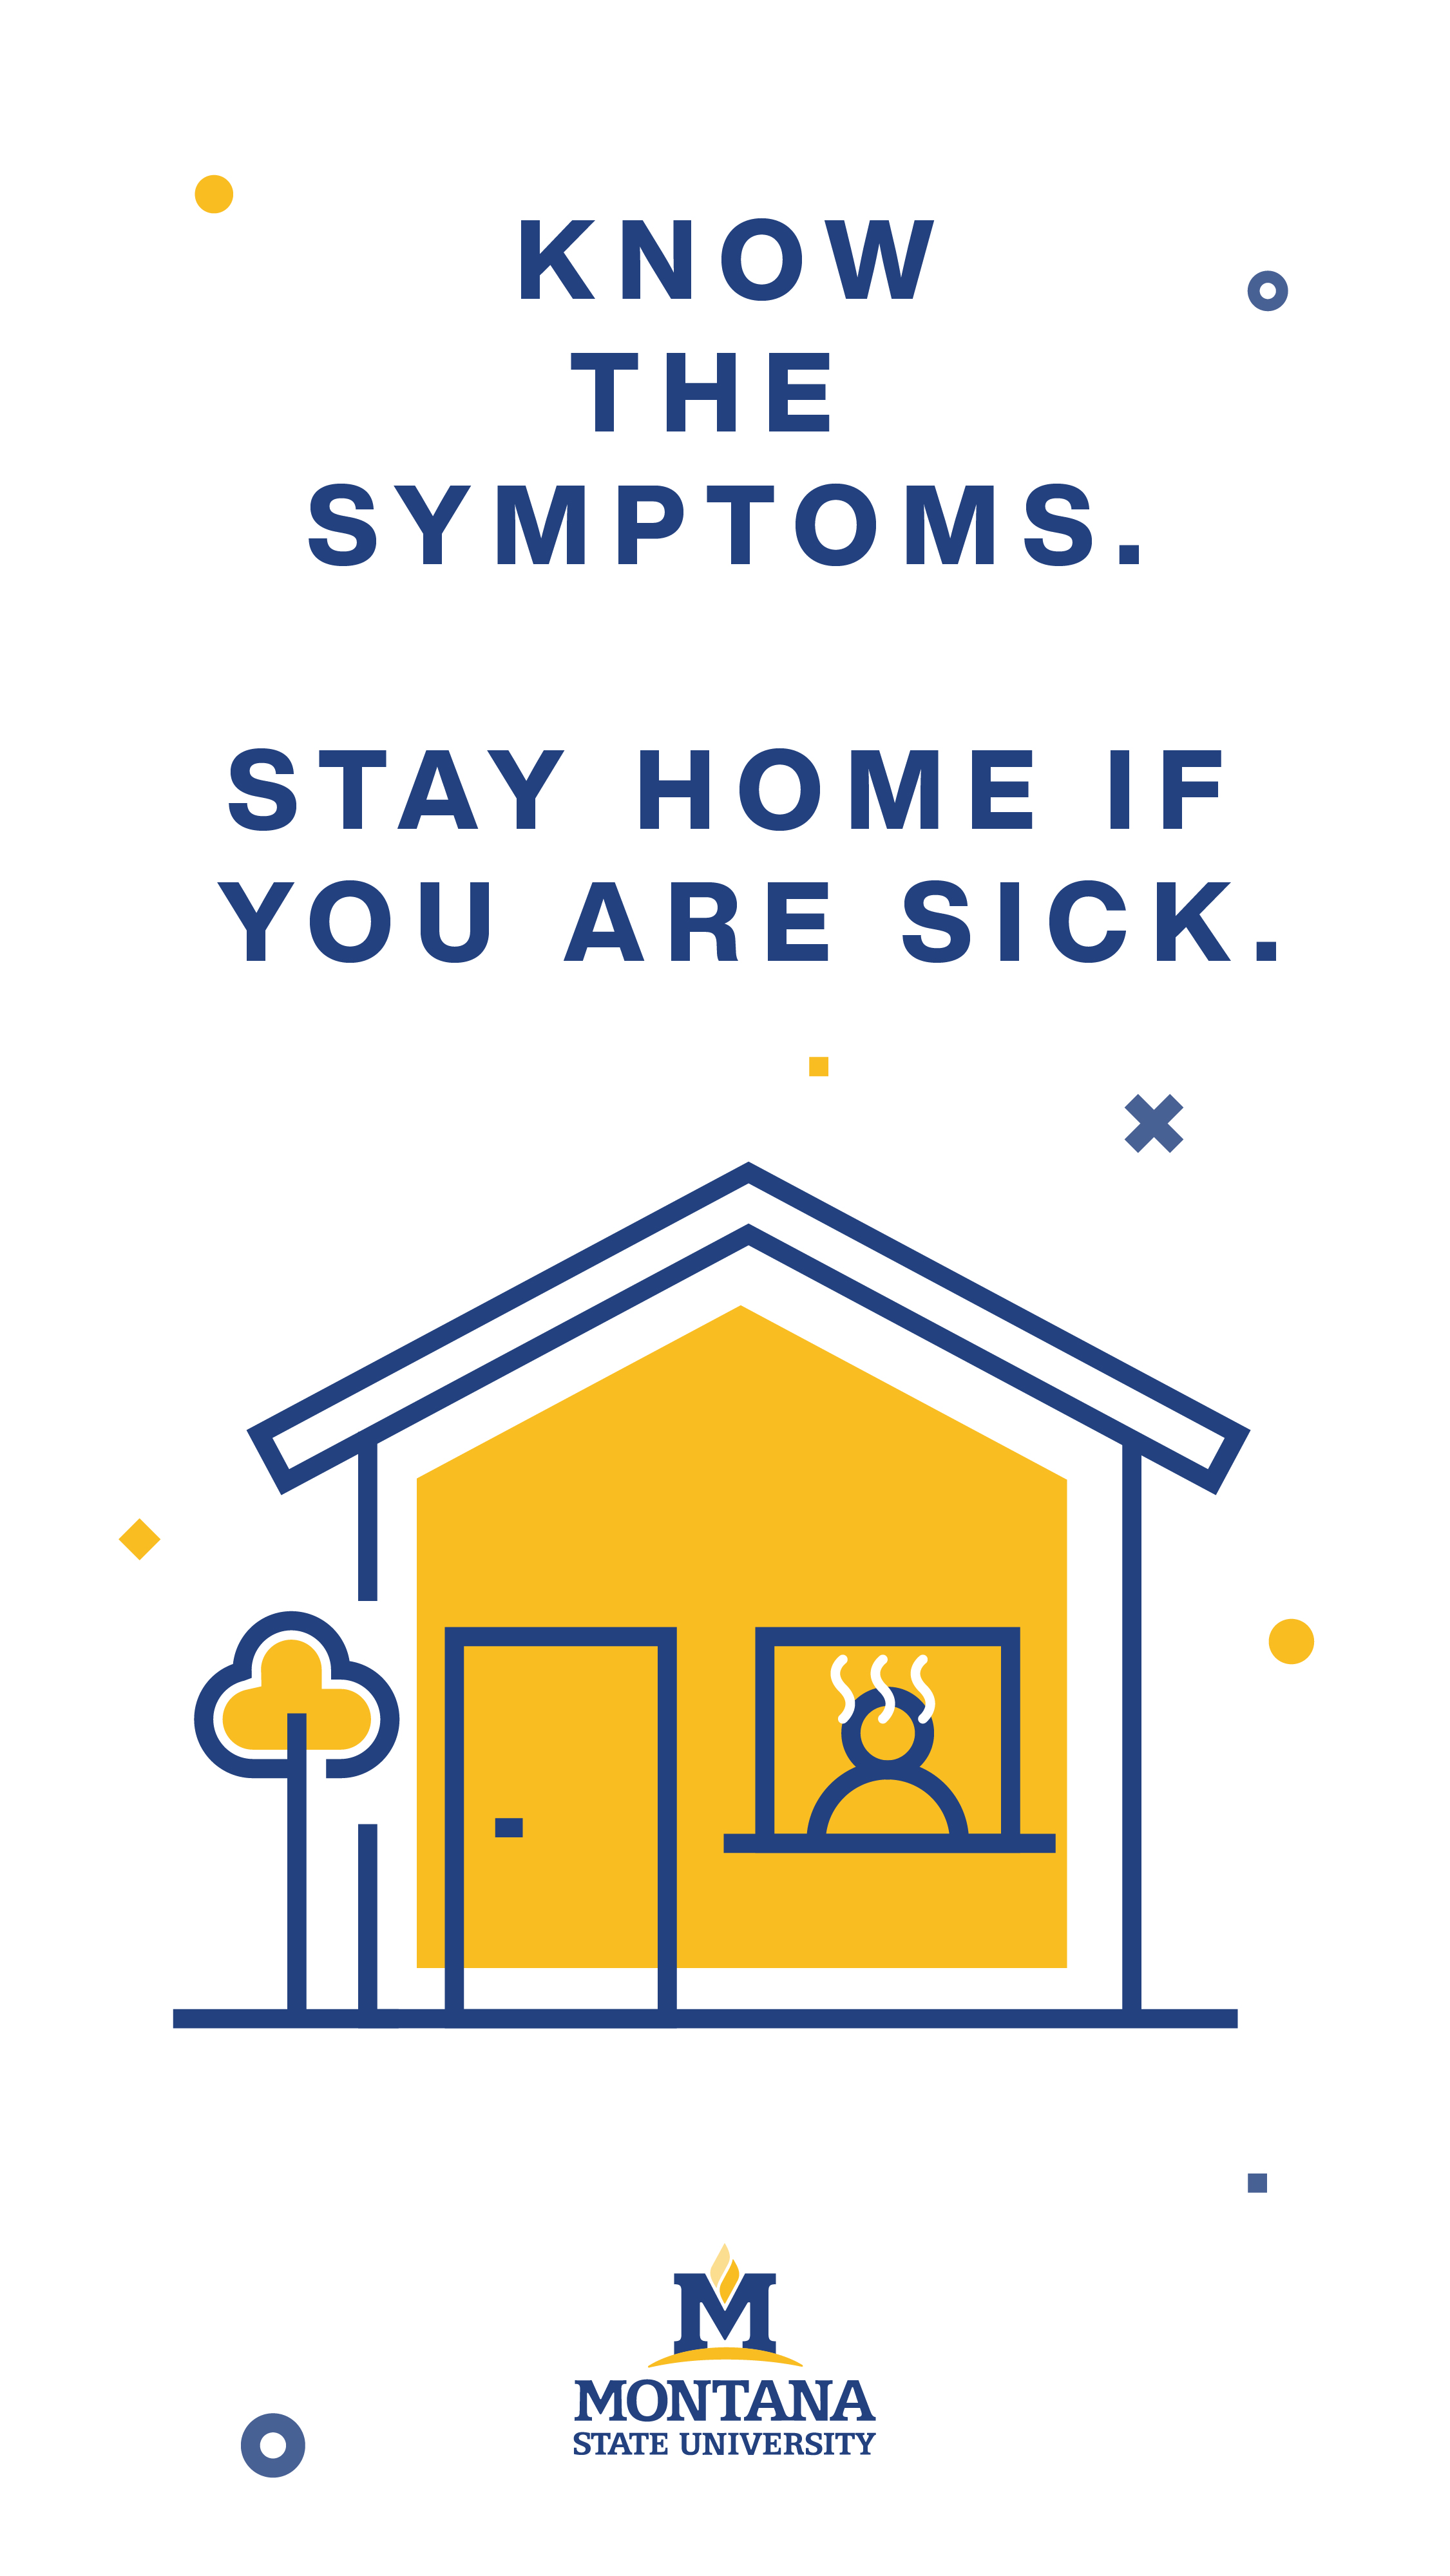 Know the symptoms. Stay home if you are sick.